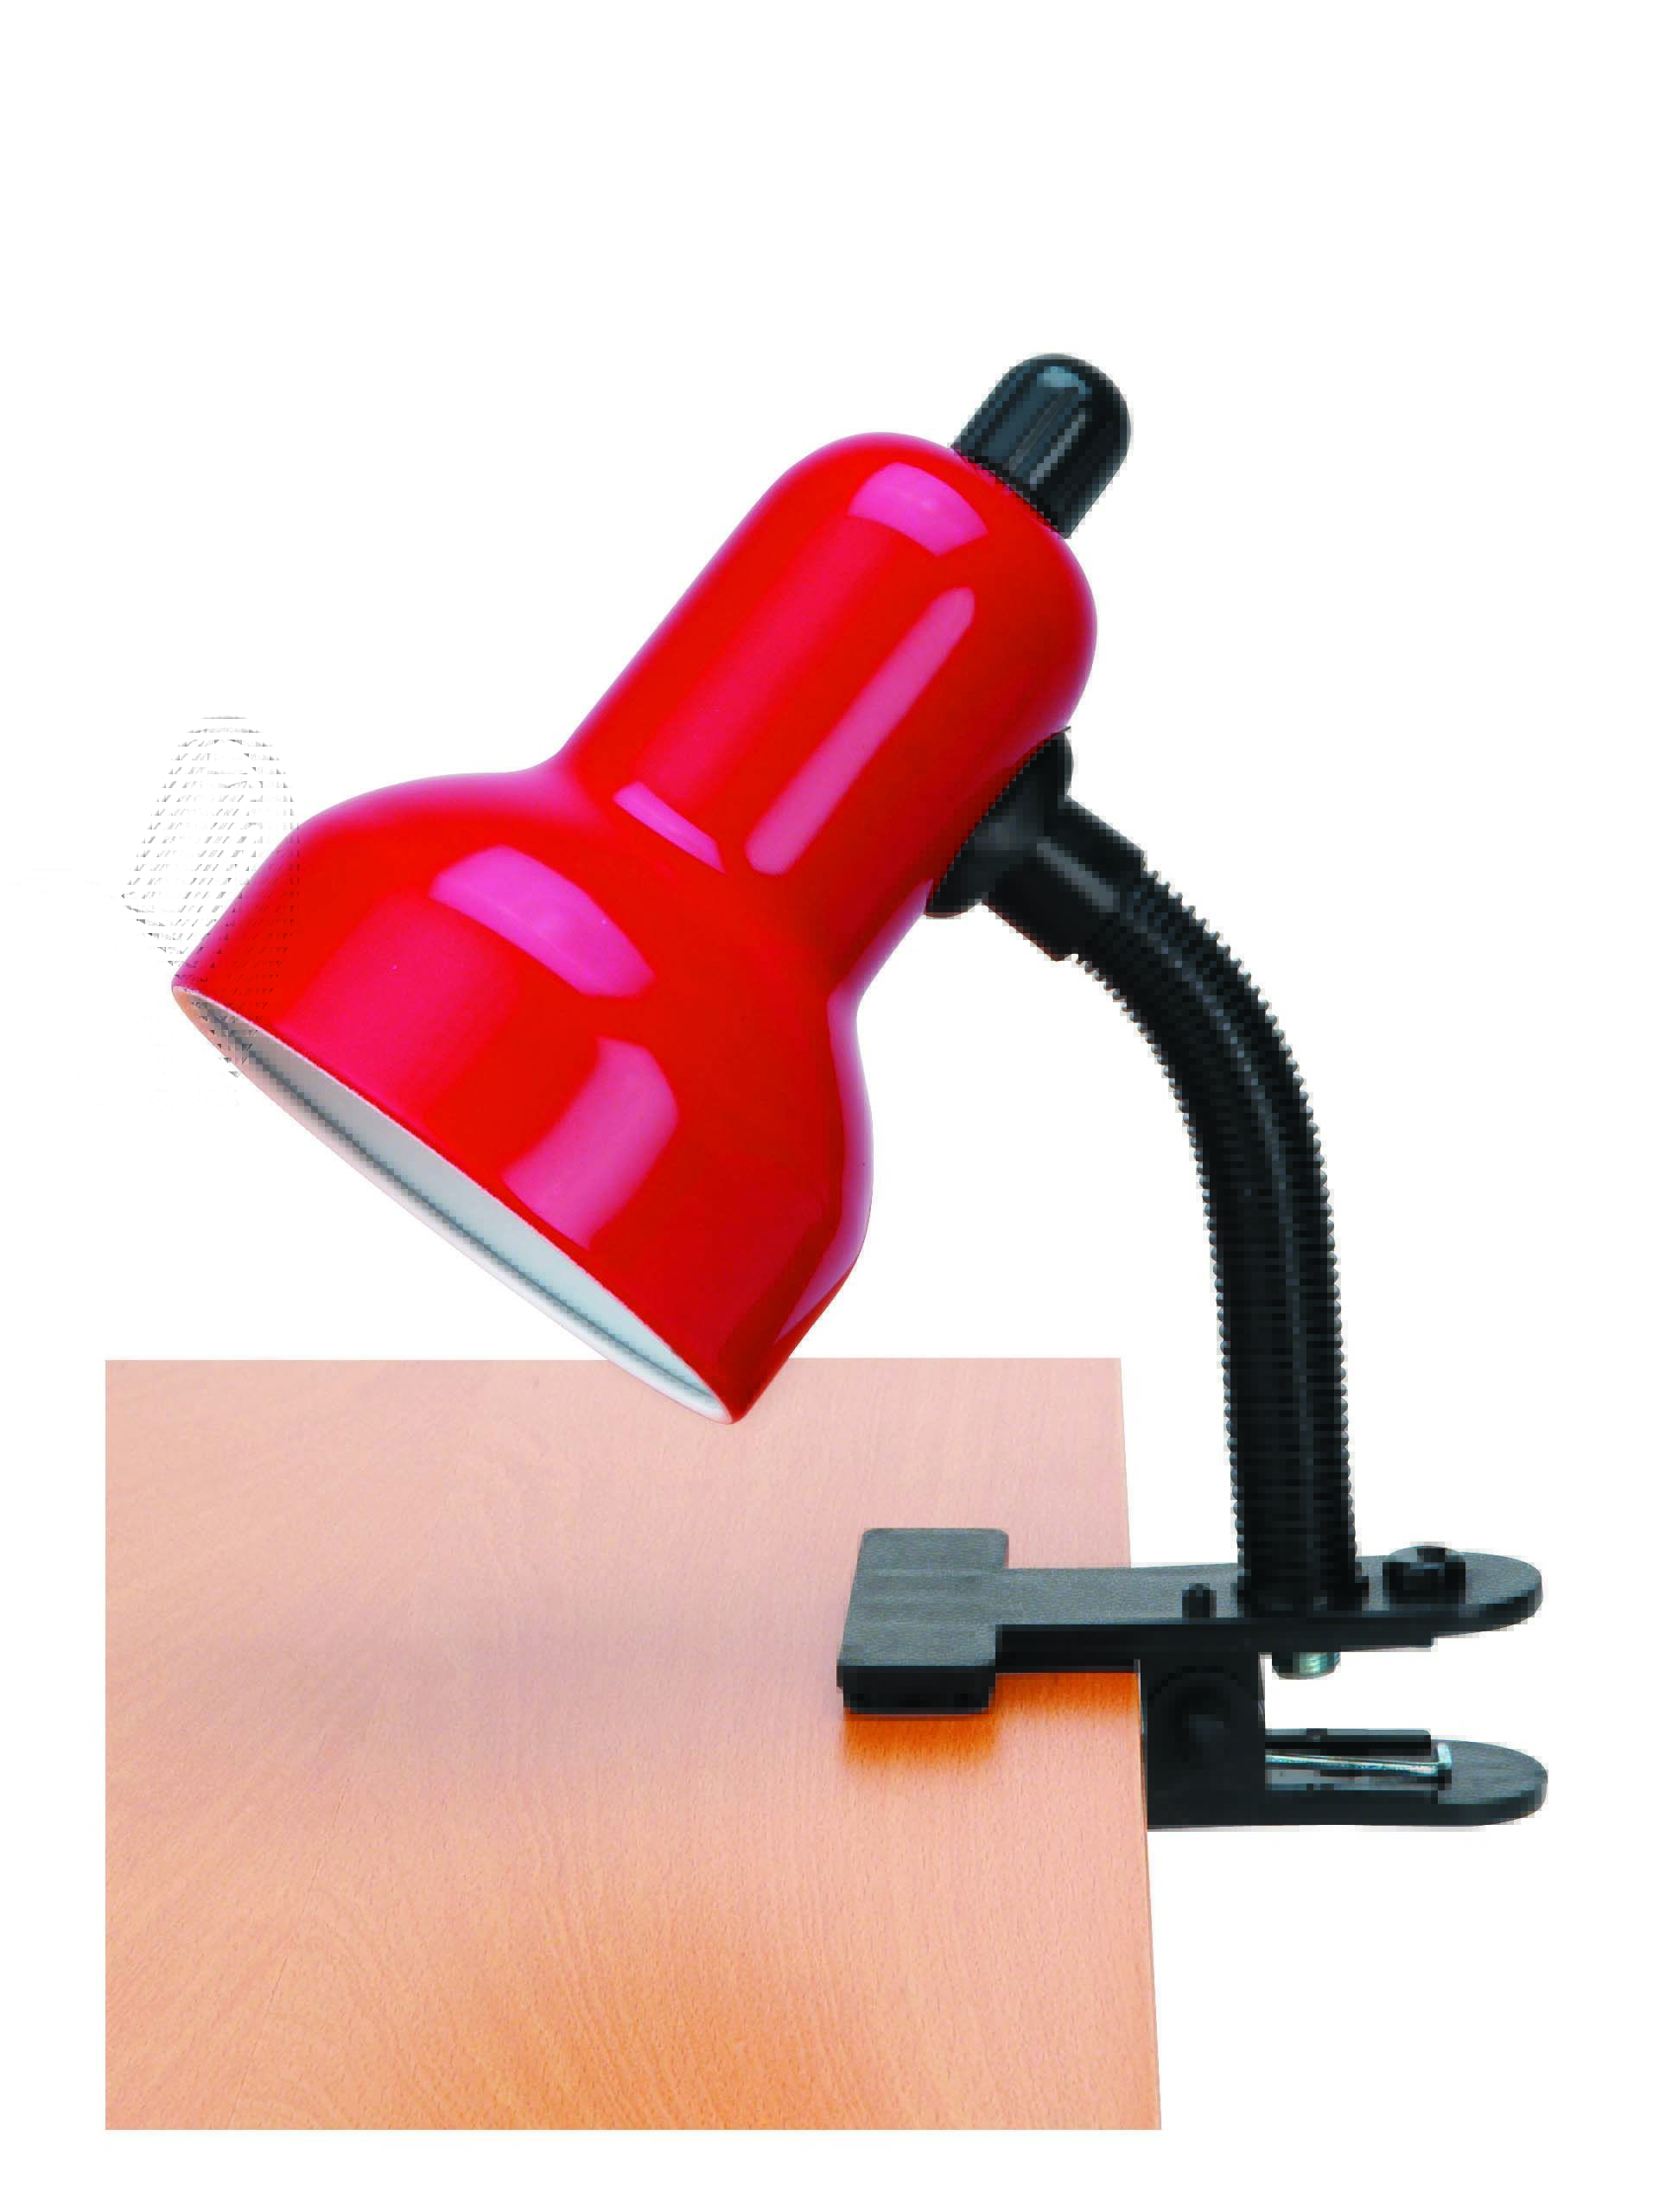 Lite Source LS-111RED Red Clamp On Lamp from the Clip-On